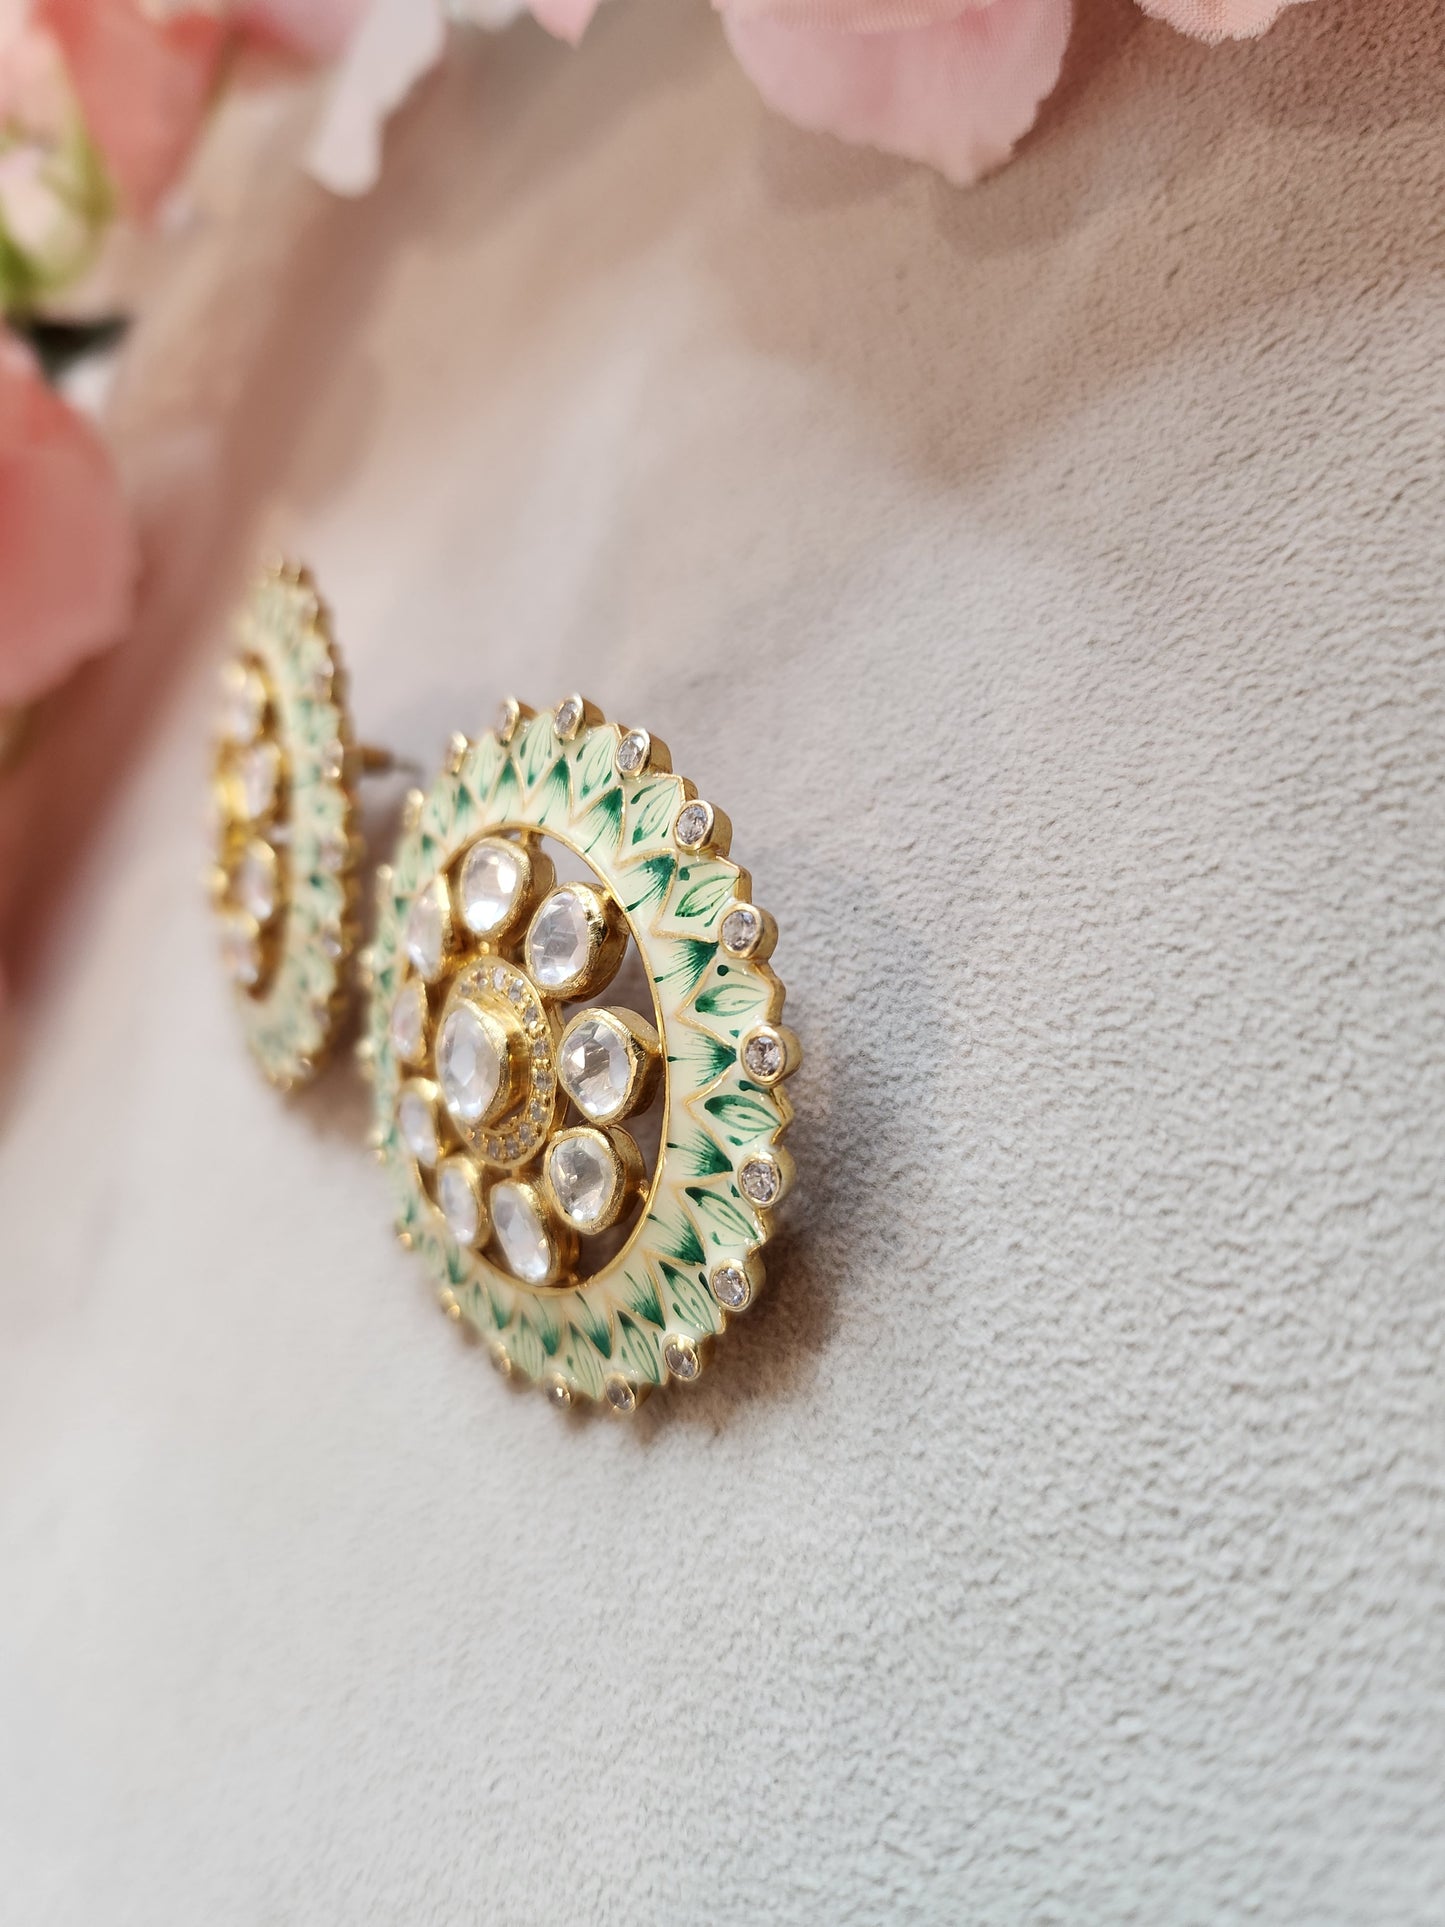 VINANTI MANJI JEWELRY - Featuring a pair of gold finish round earrings studded